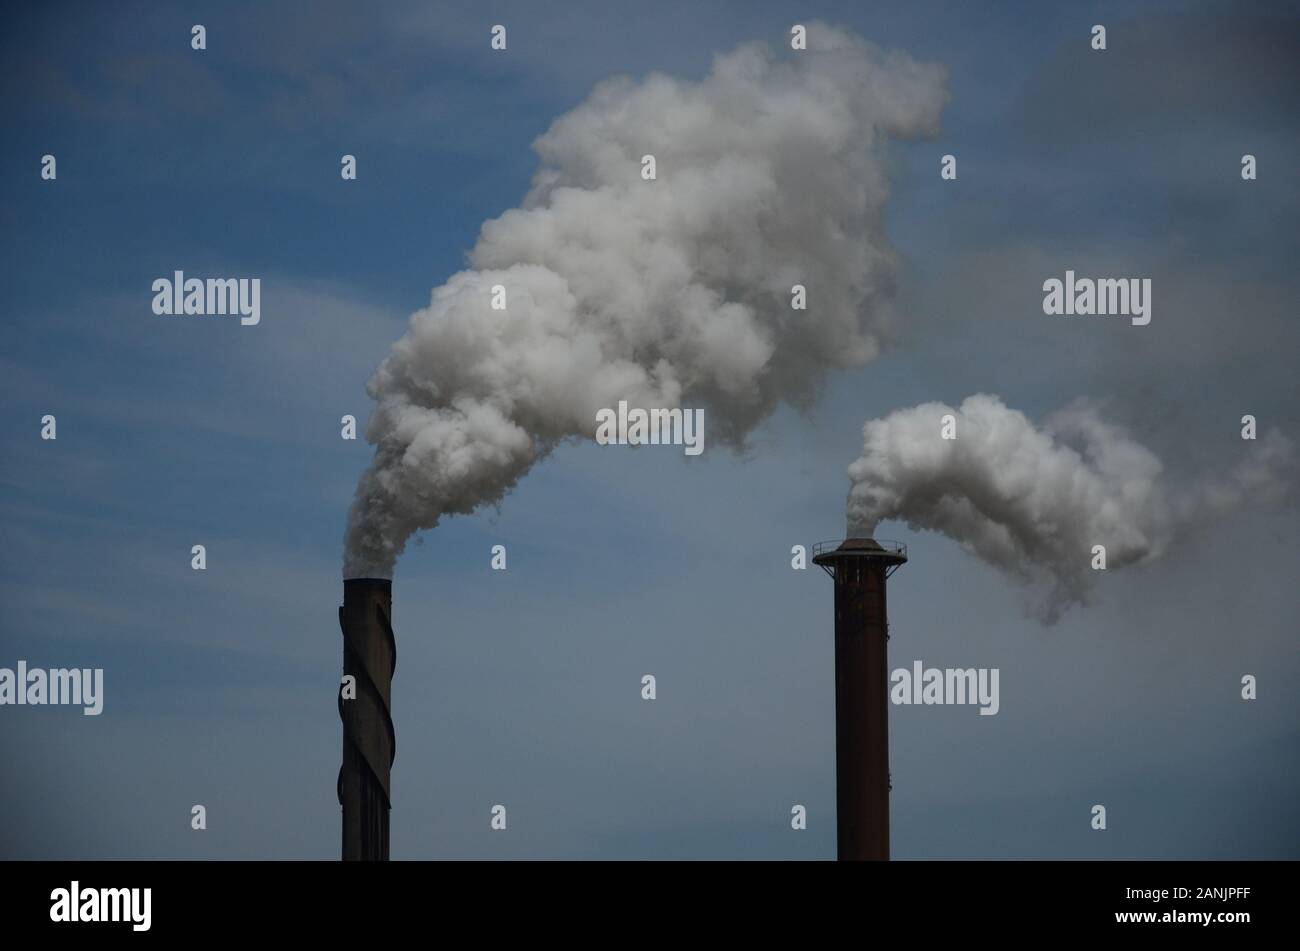 Industrial pollution, global warming Stock Photo